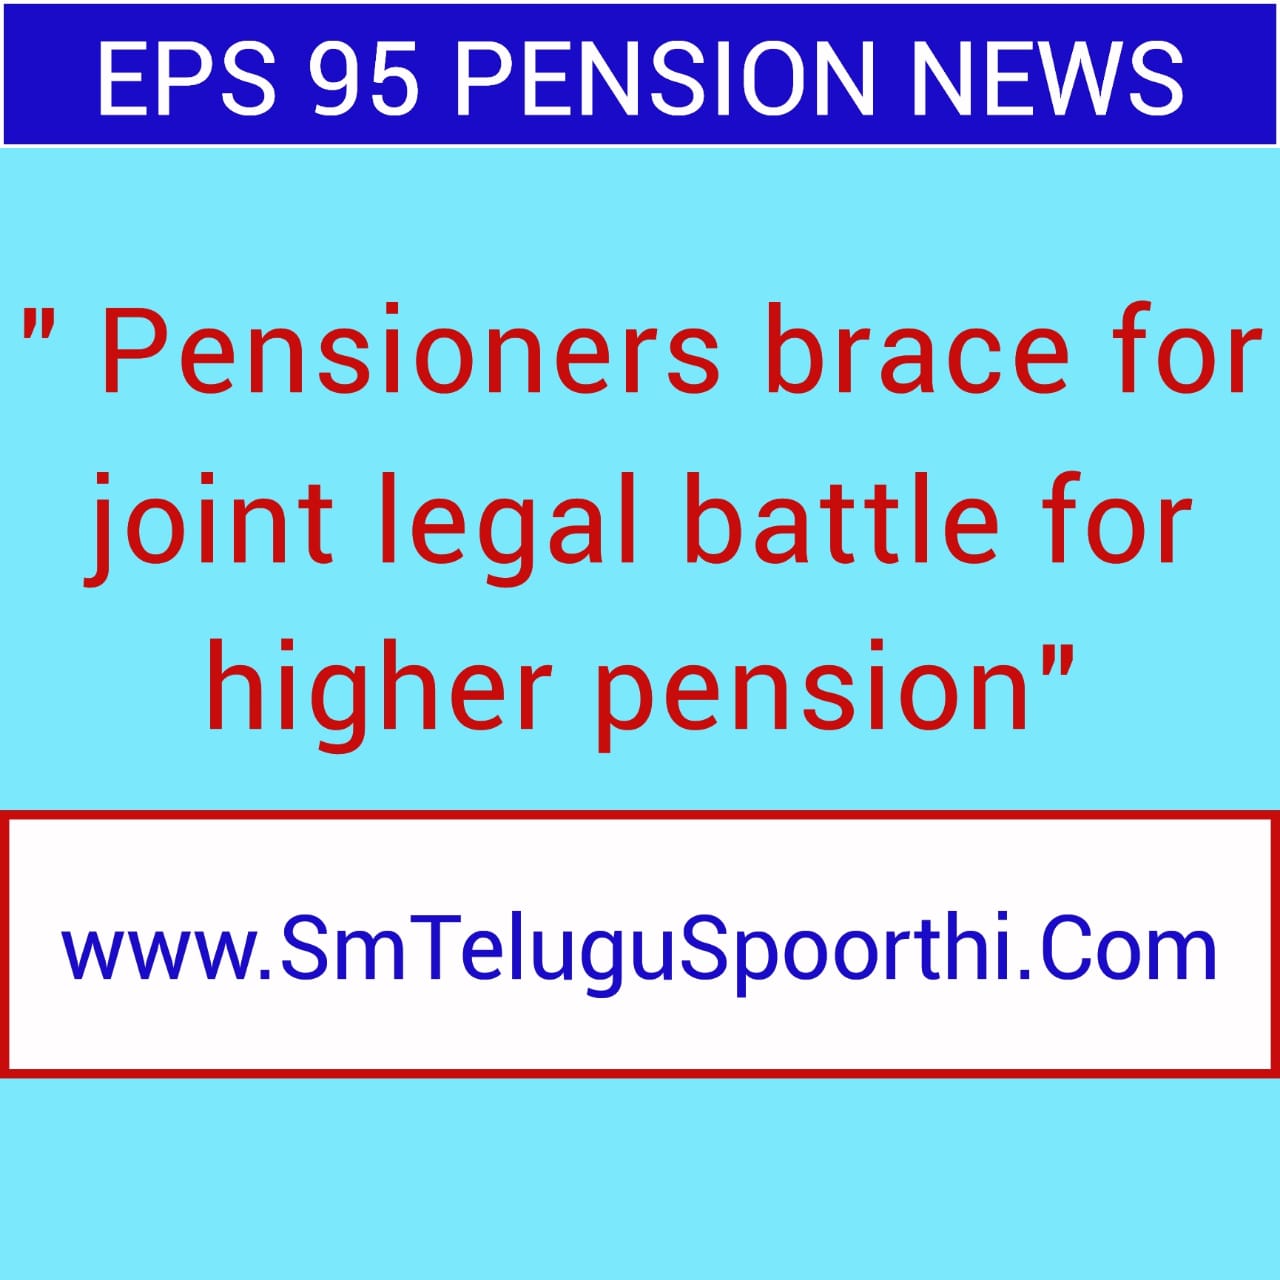 Pensioners brace for joint legal battle for higher pension